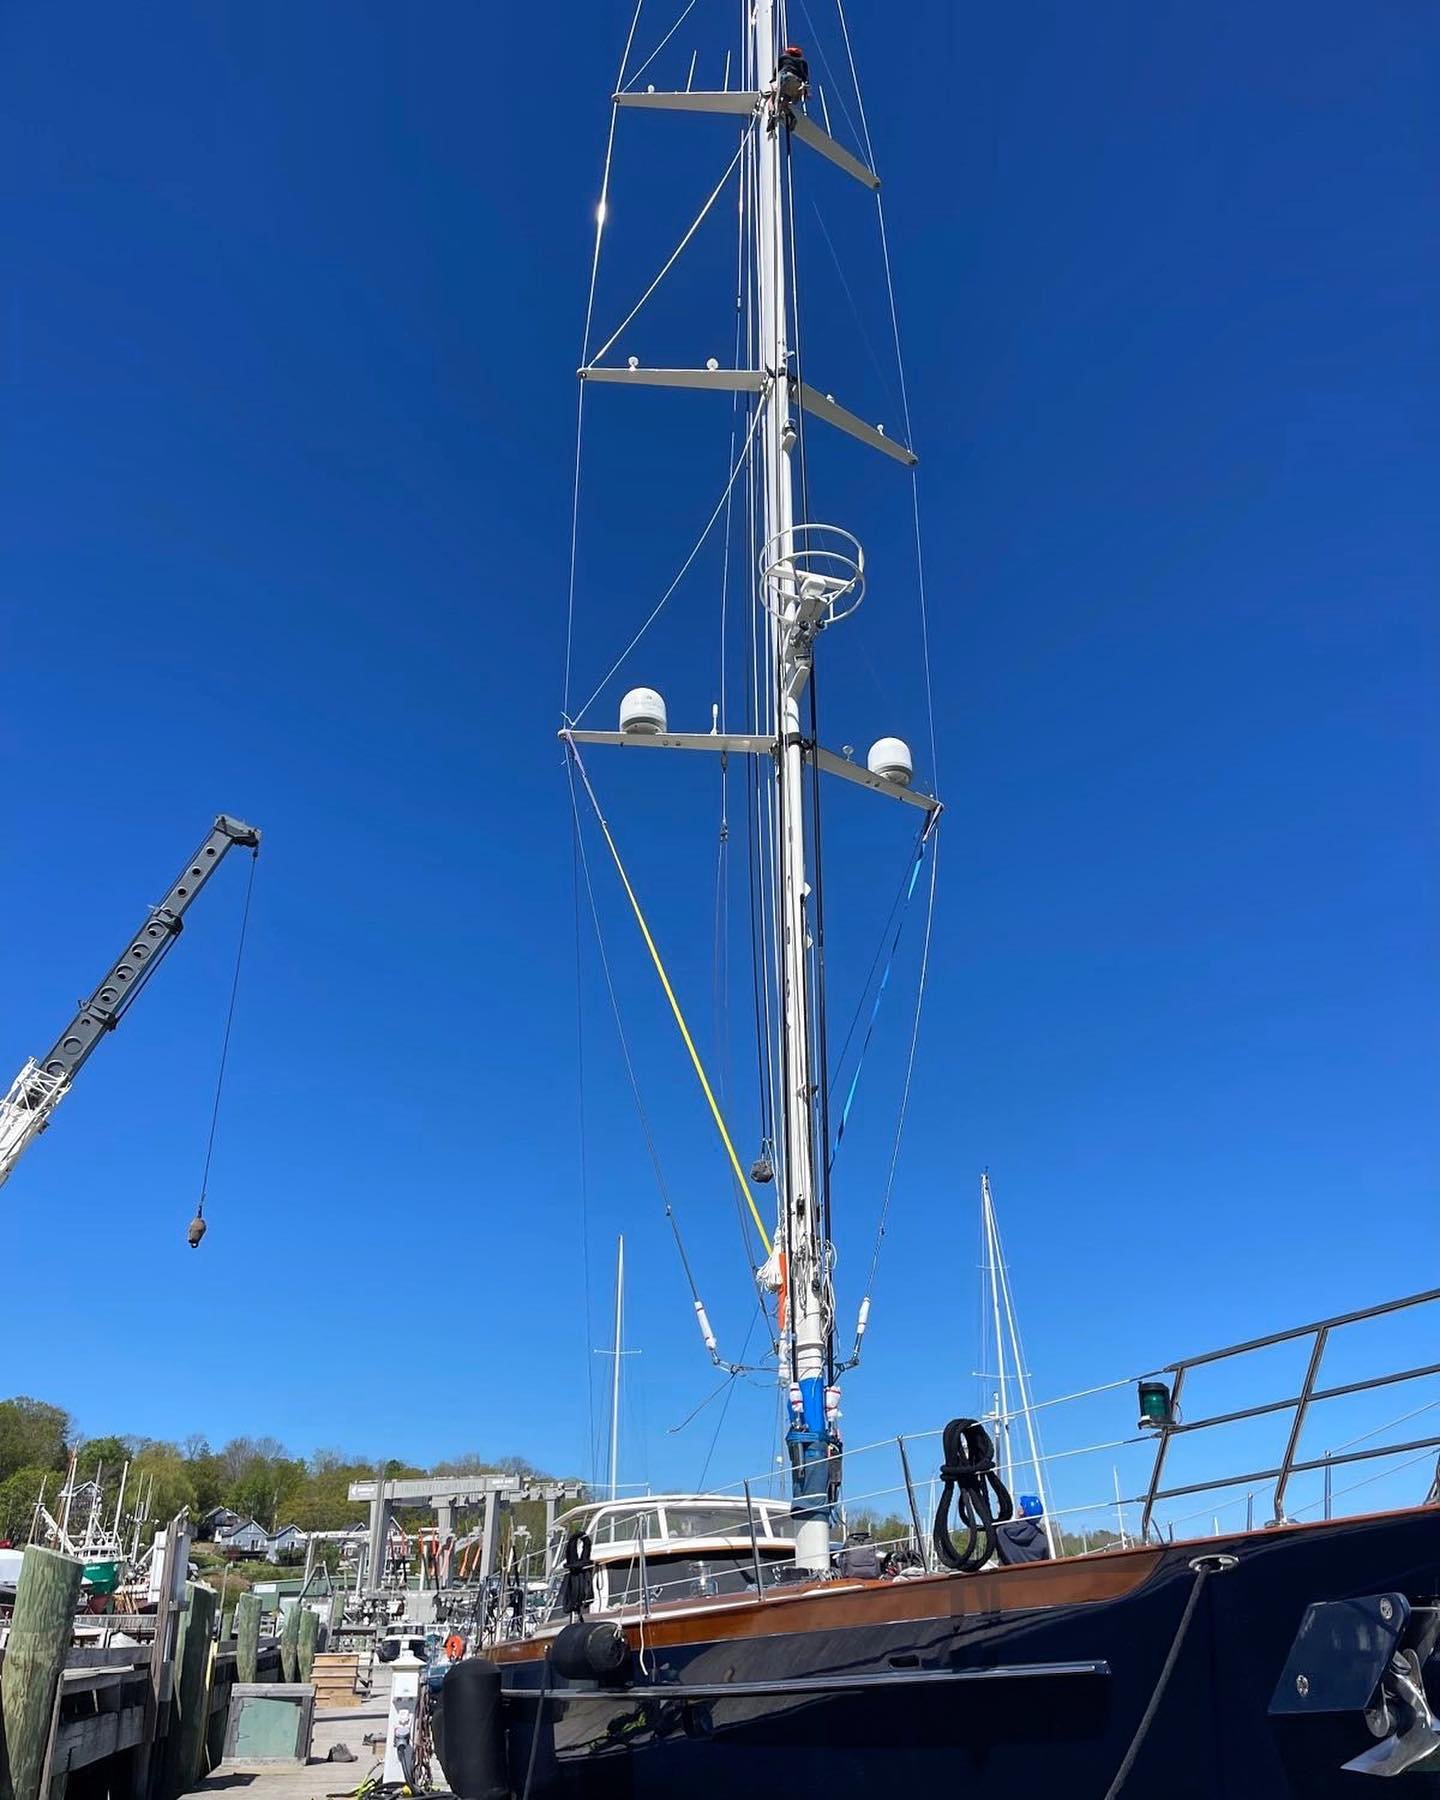 Mast unstepping of S/Y First Light today at Front Street Shipyard. 🏗️ ⚓️⛵️☀️ 
.
.
.
.
.
.
. 
#newportrigginggroup 
#frontstreetshipyard 
#belfast